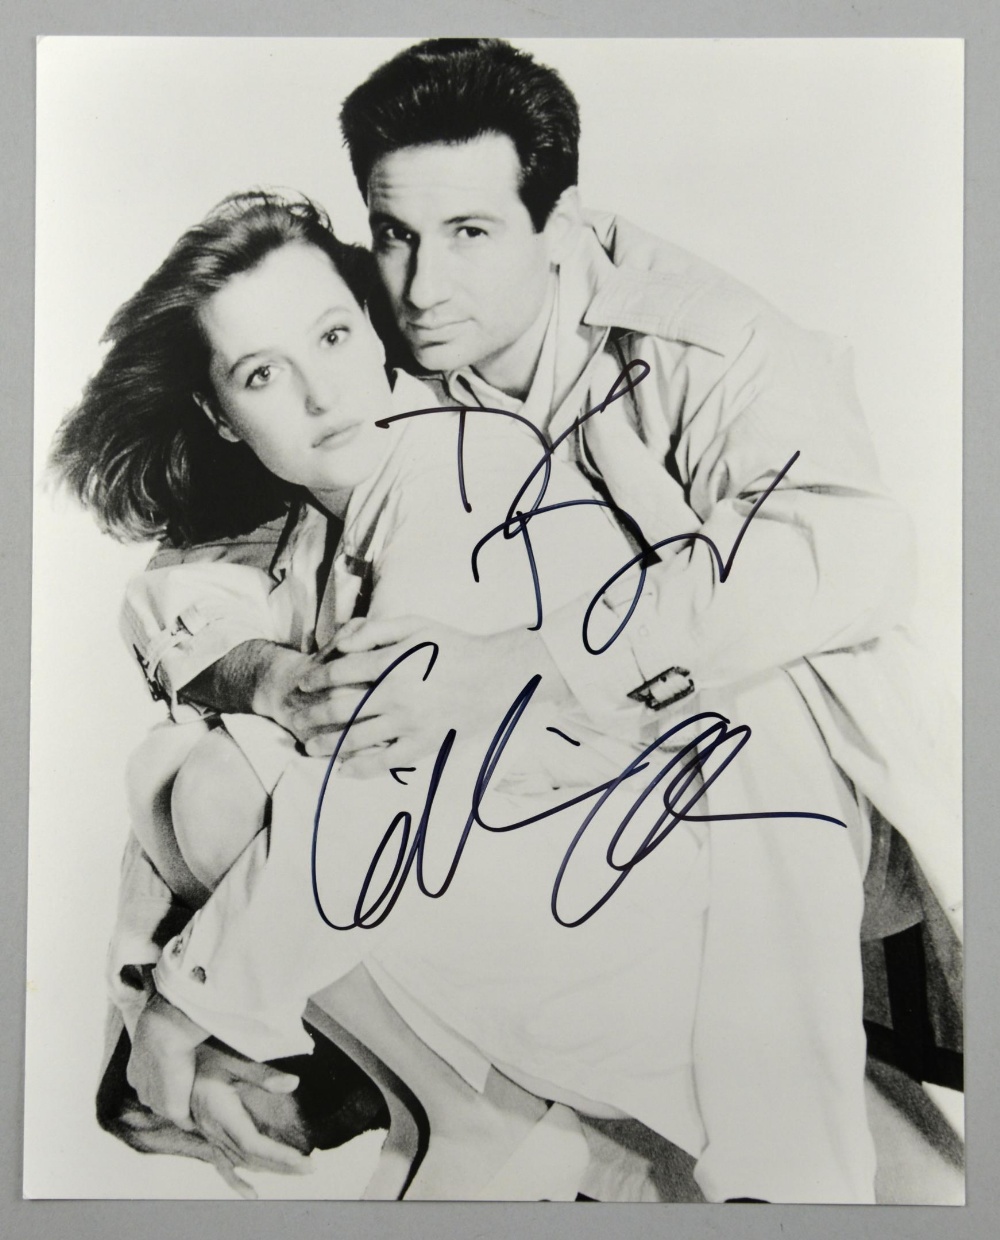 Revised Estimate - The X Files, Promotional photograph signed by David Duchovny & Gillian